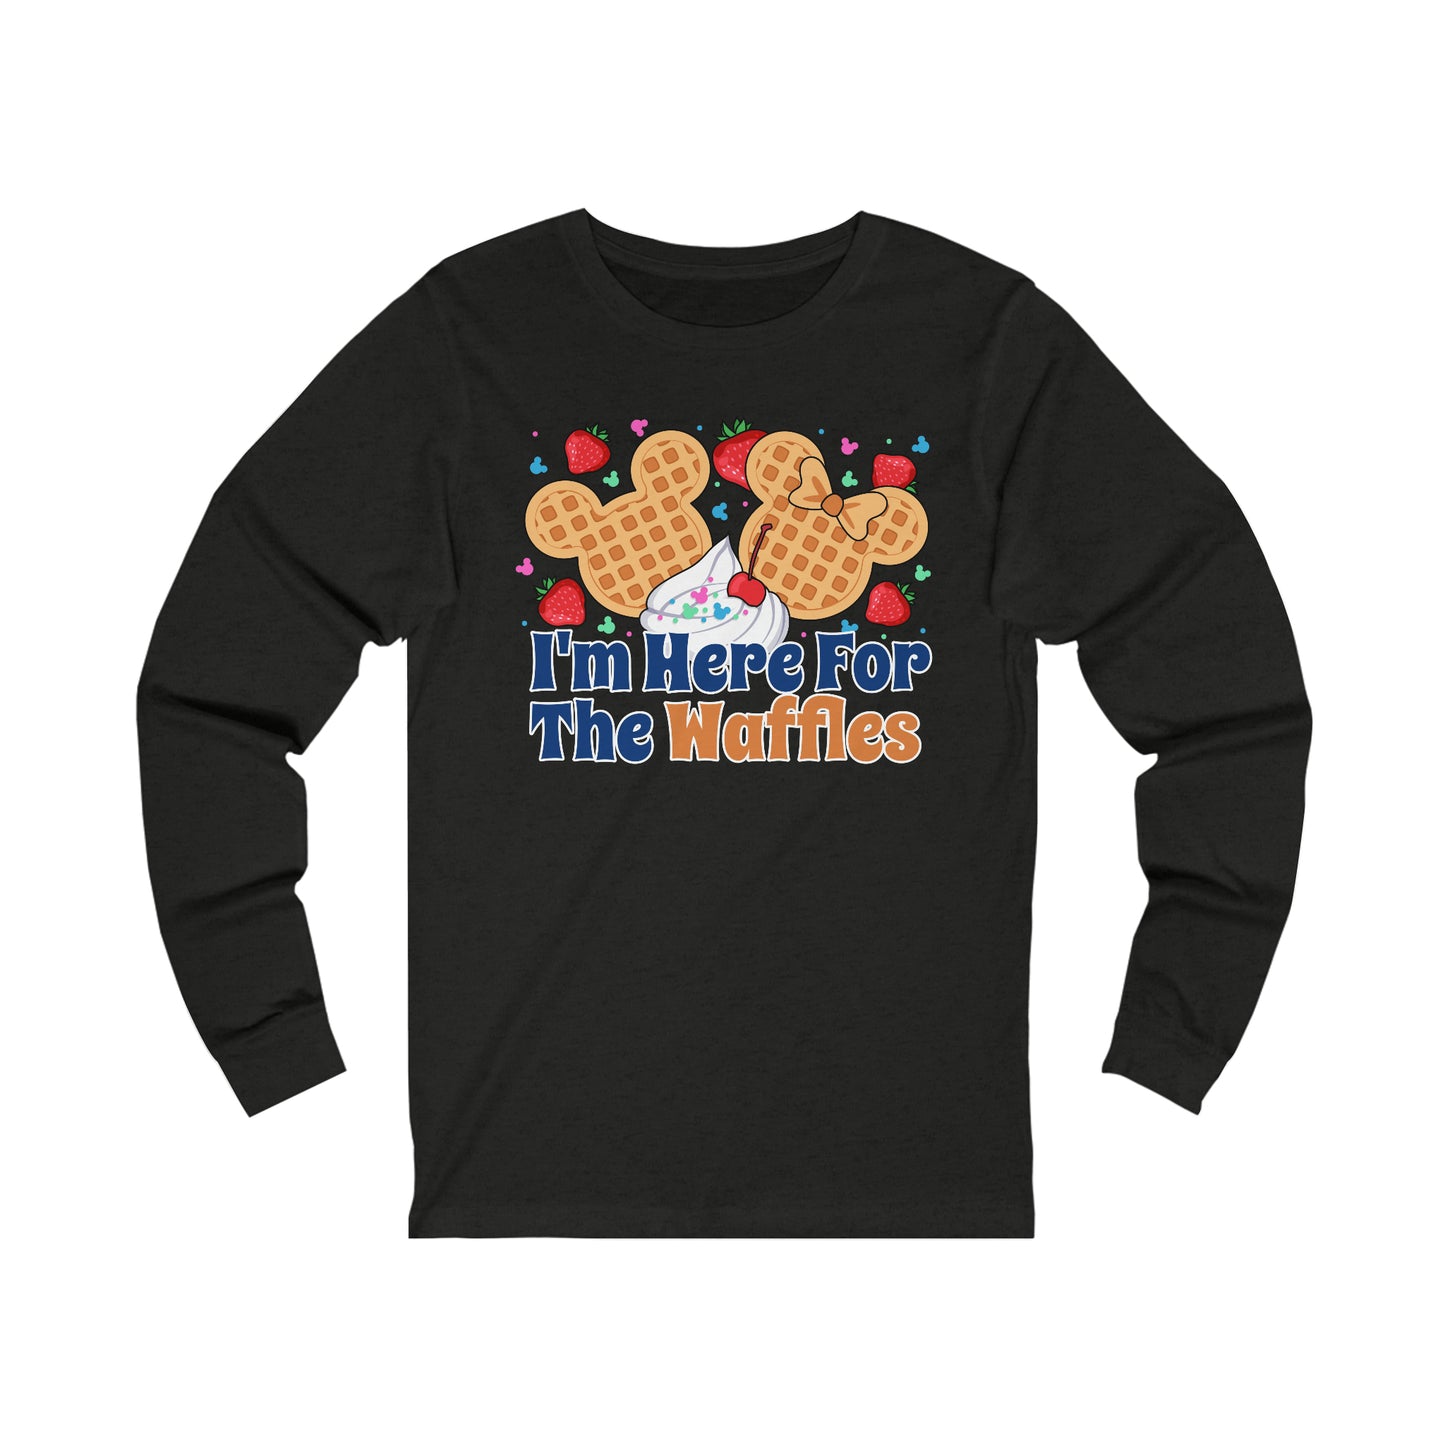 I'm Here For The Waffles Unisex Long Sleeve Graphic Tee